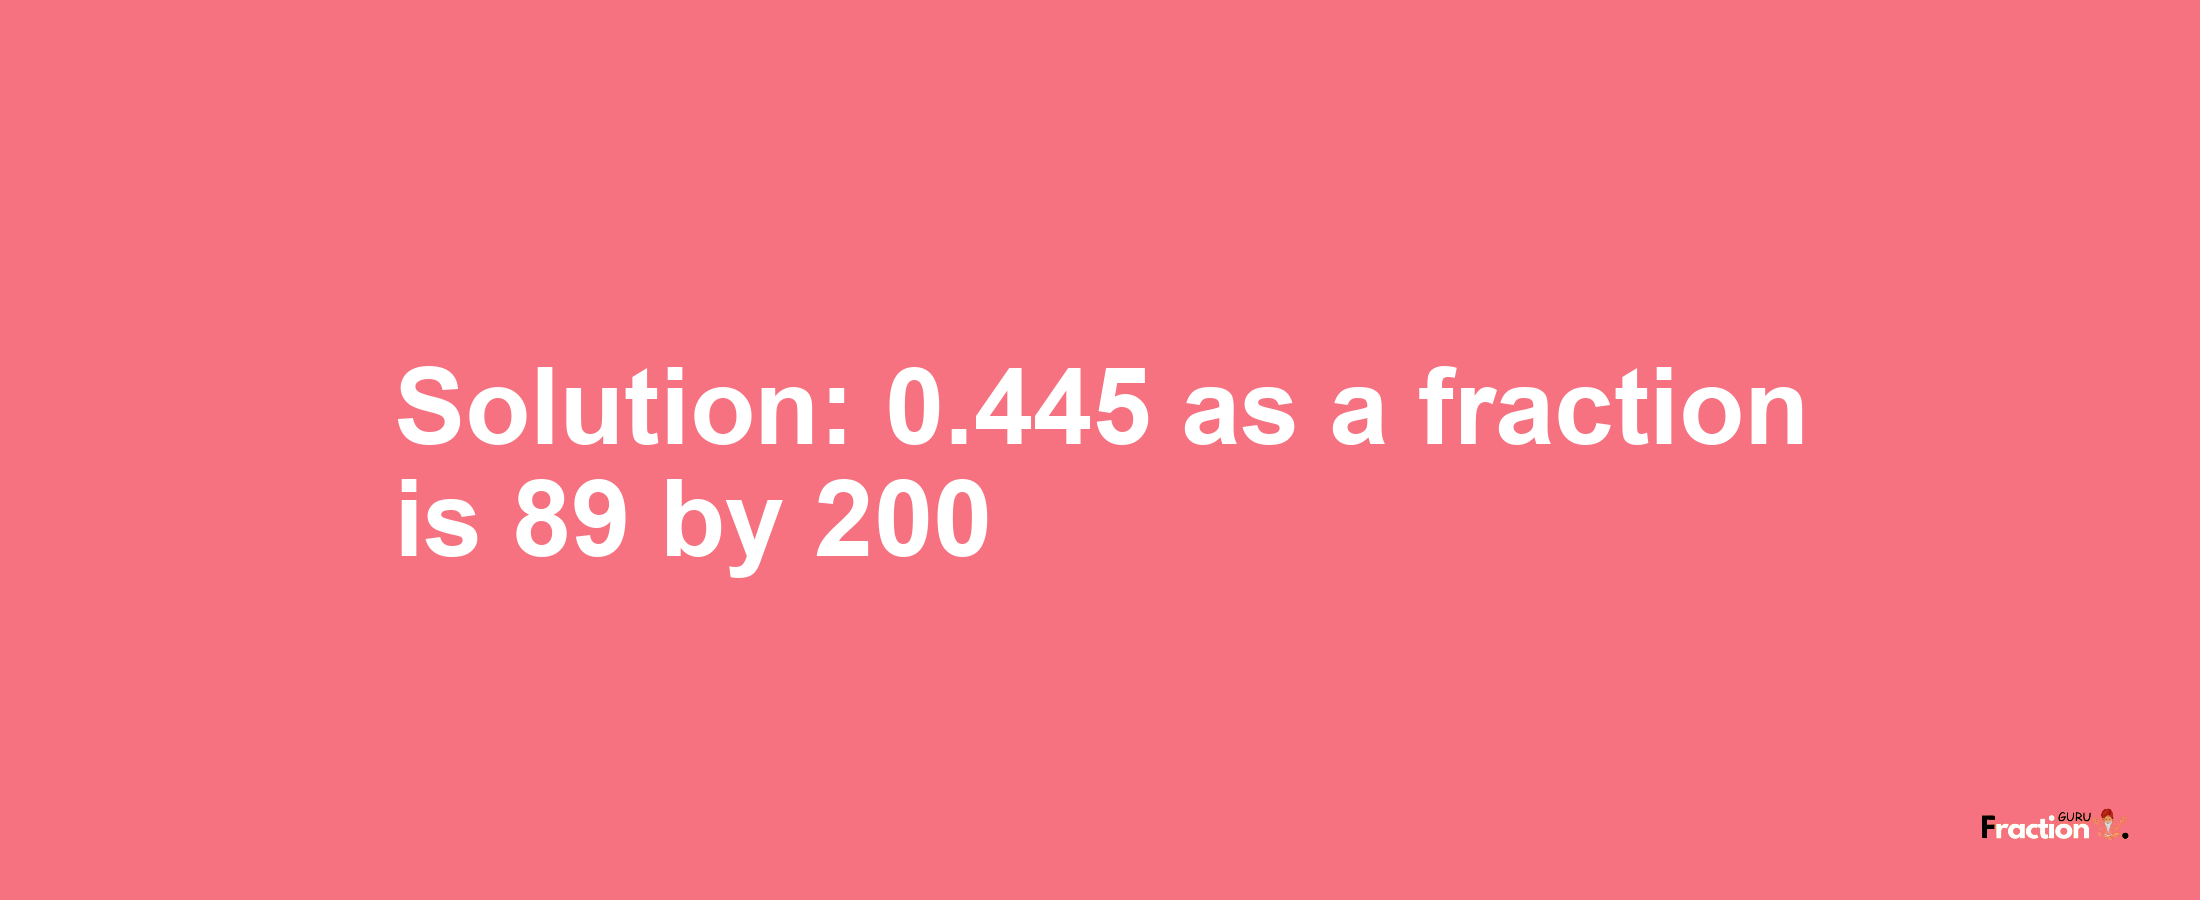 Solution:0.445 as a fraction is 89/200